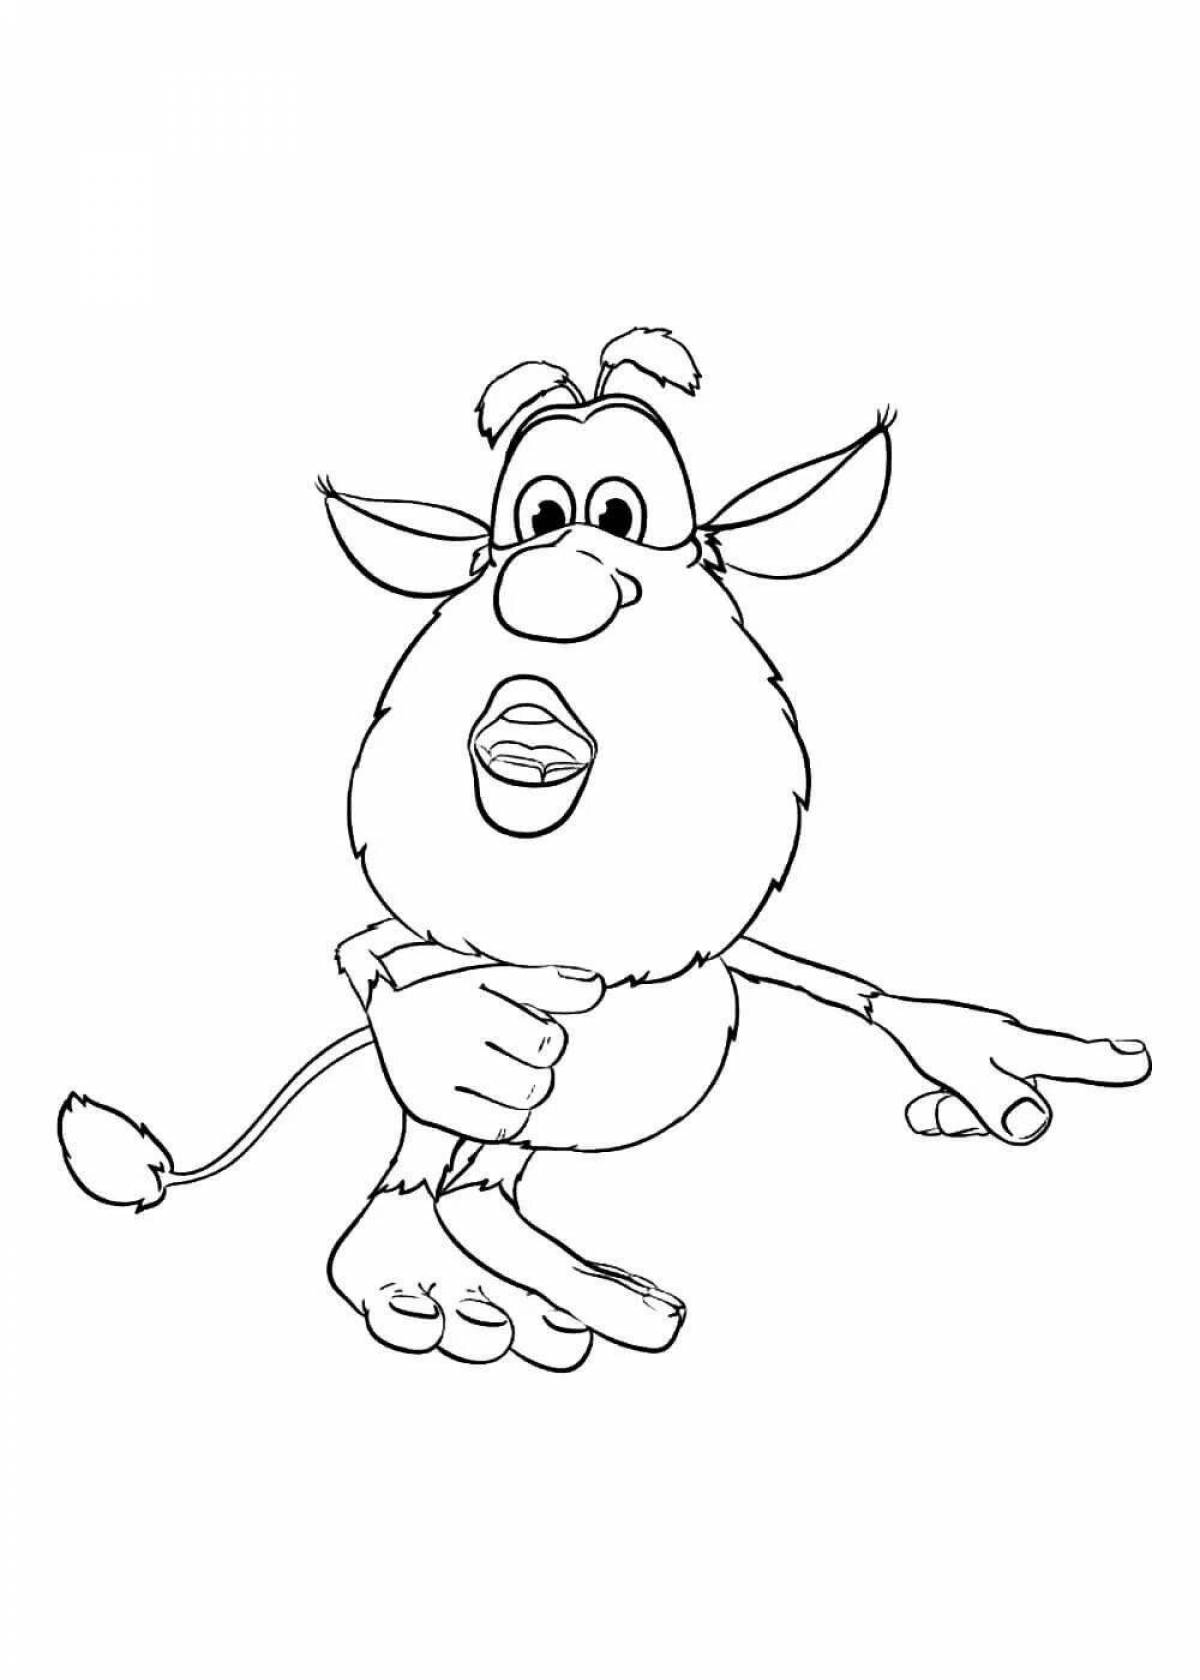 Hubba bubba colorful coloring page